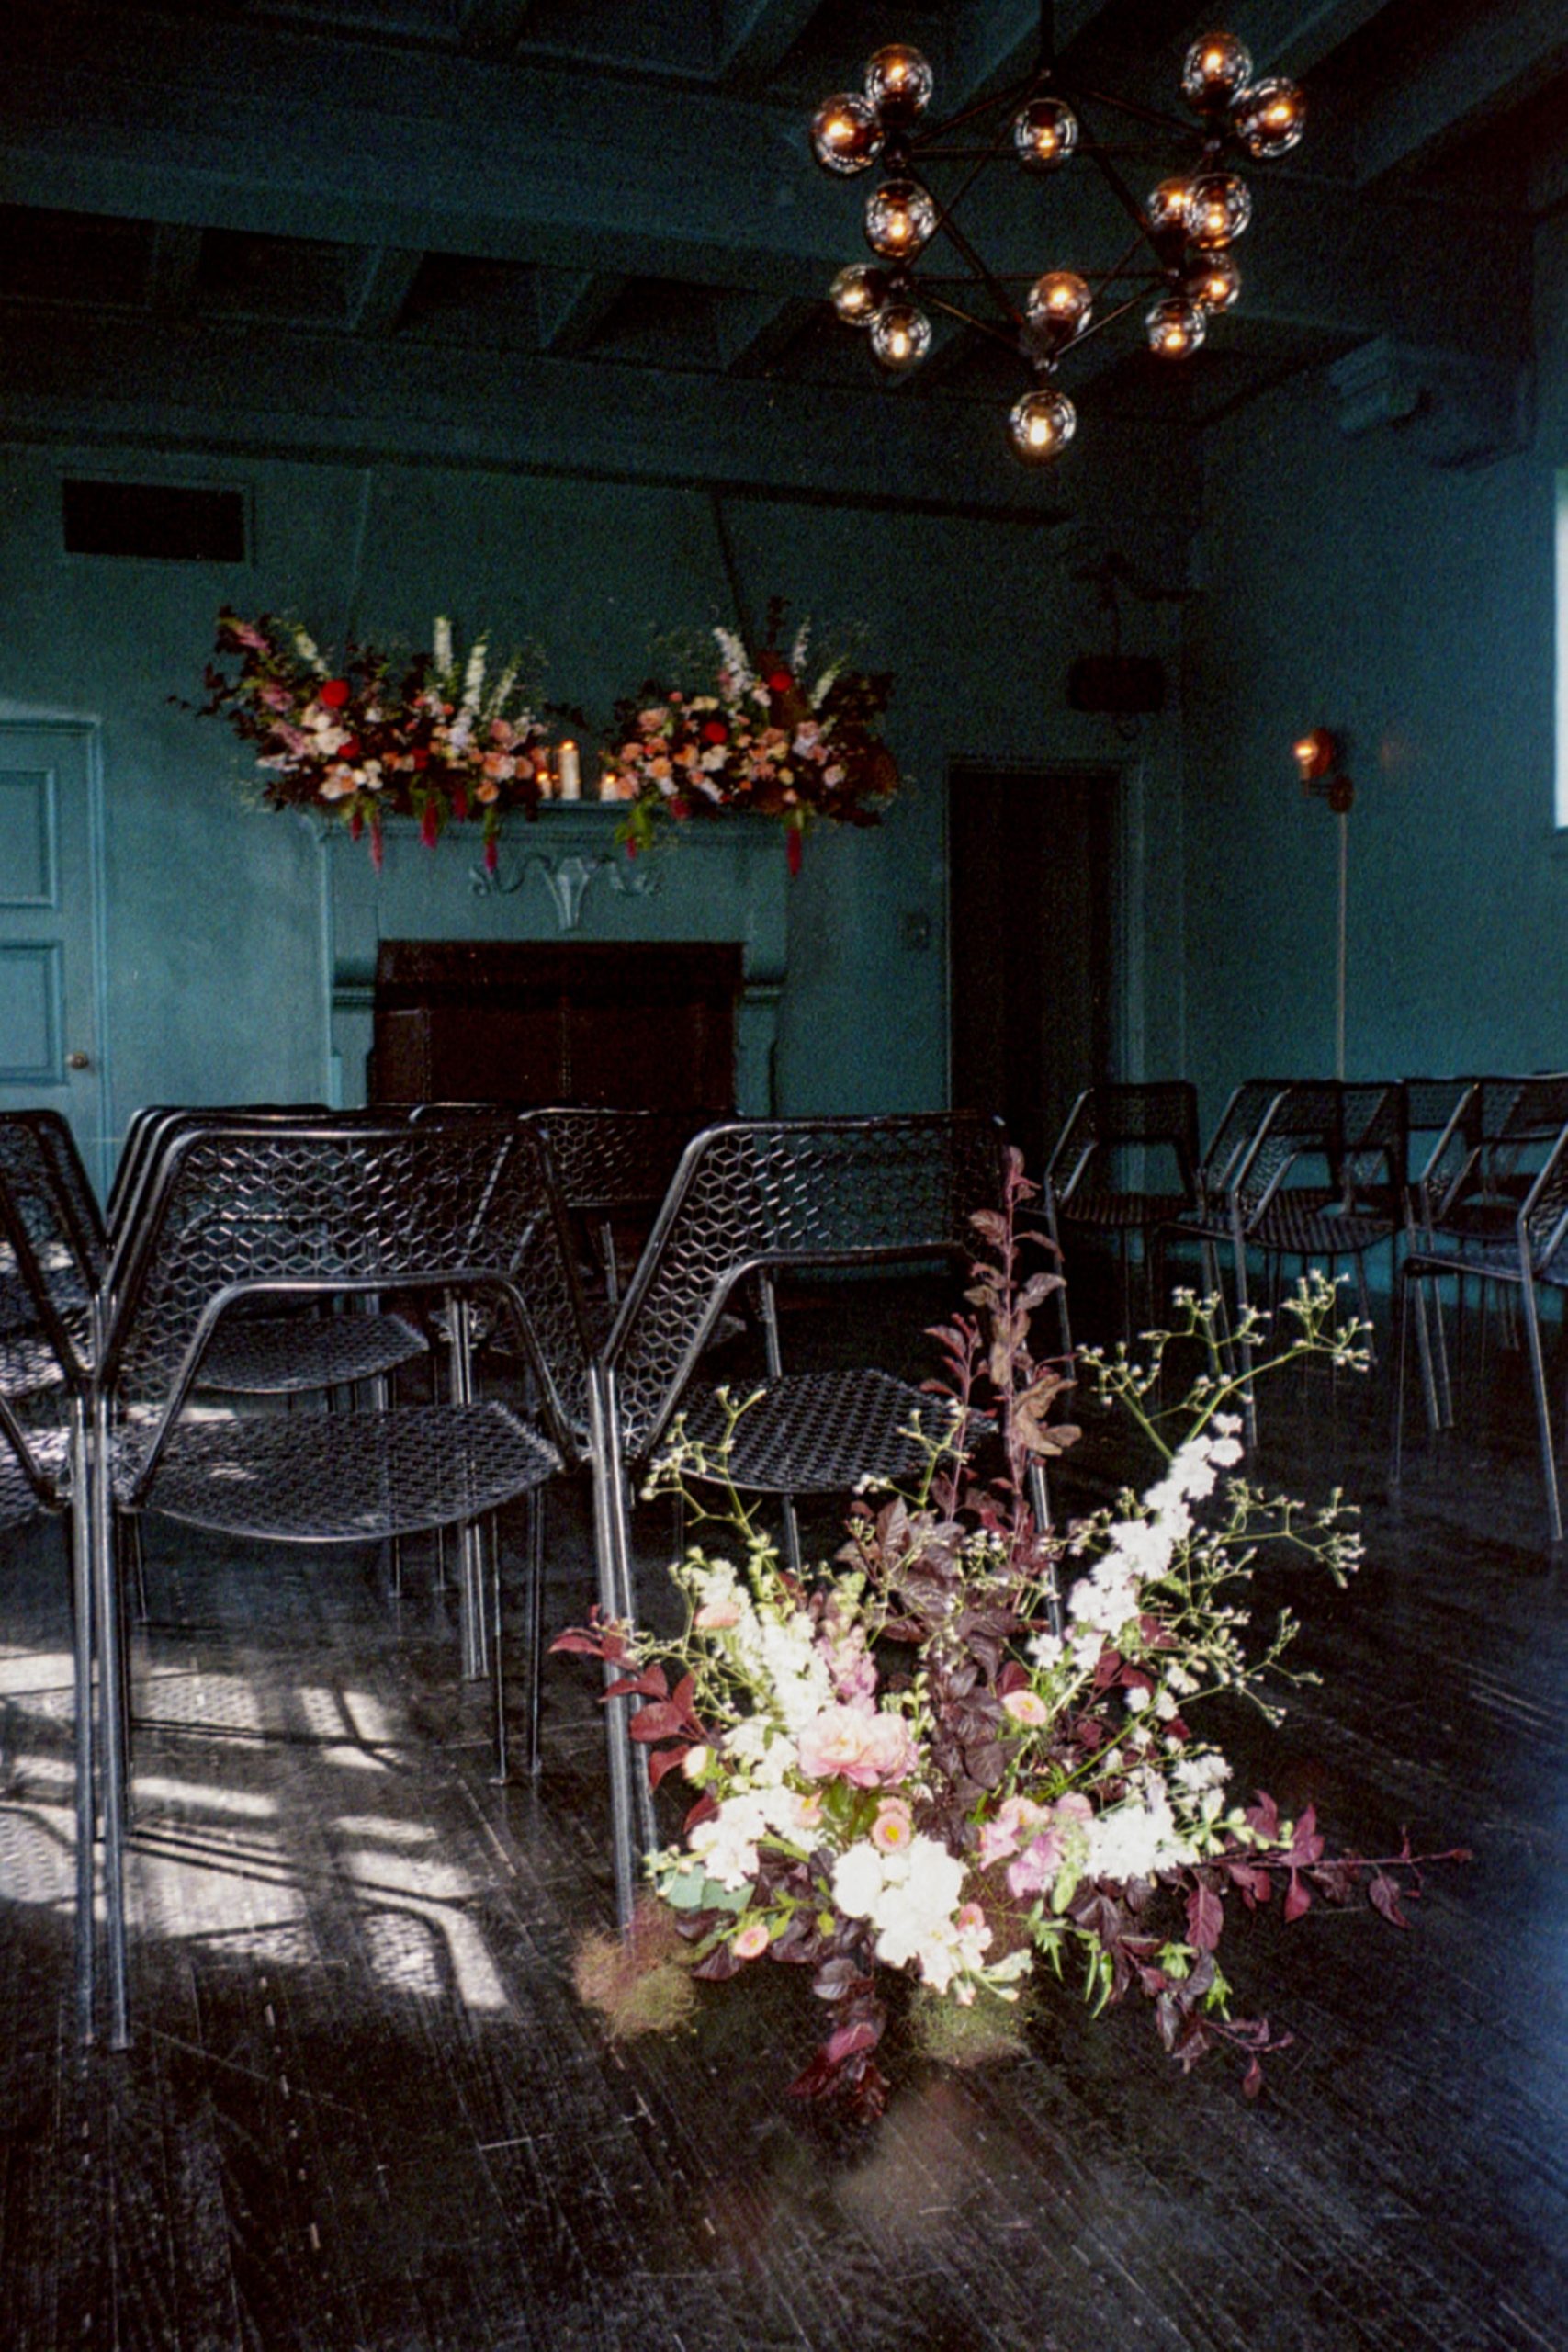 chairs set for a wedding